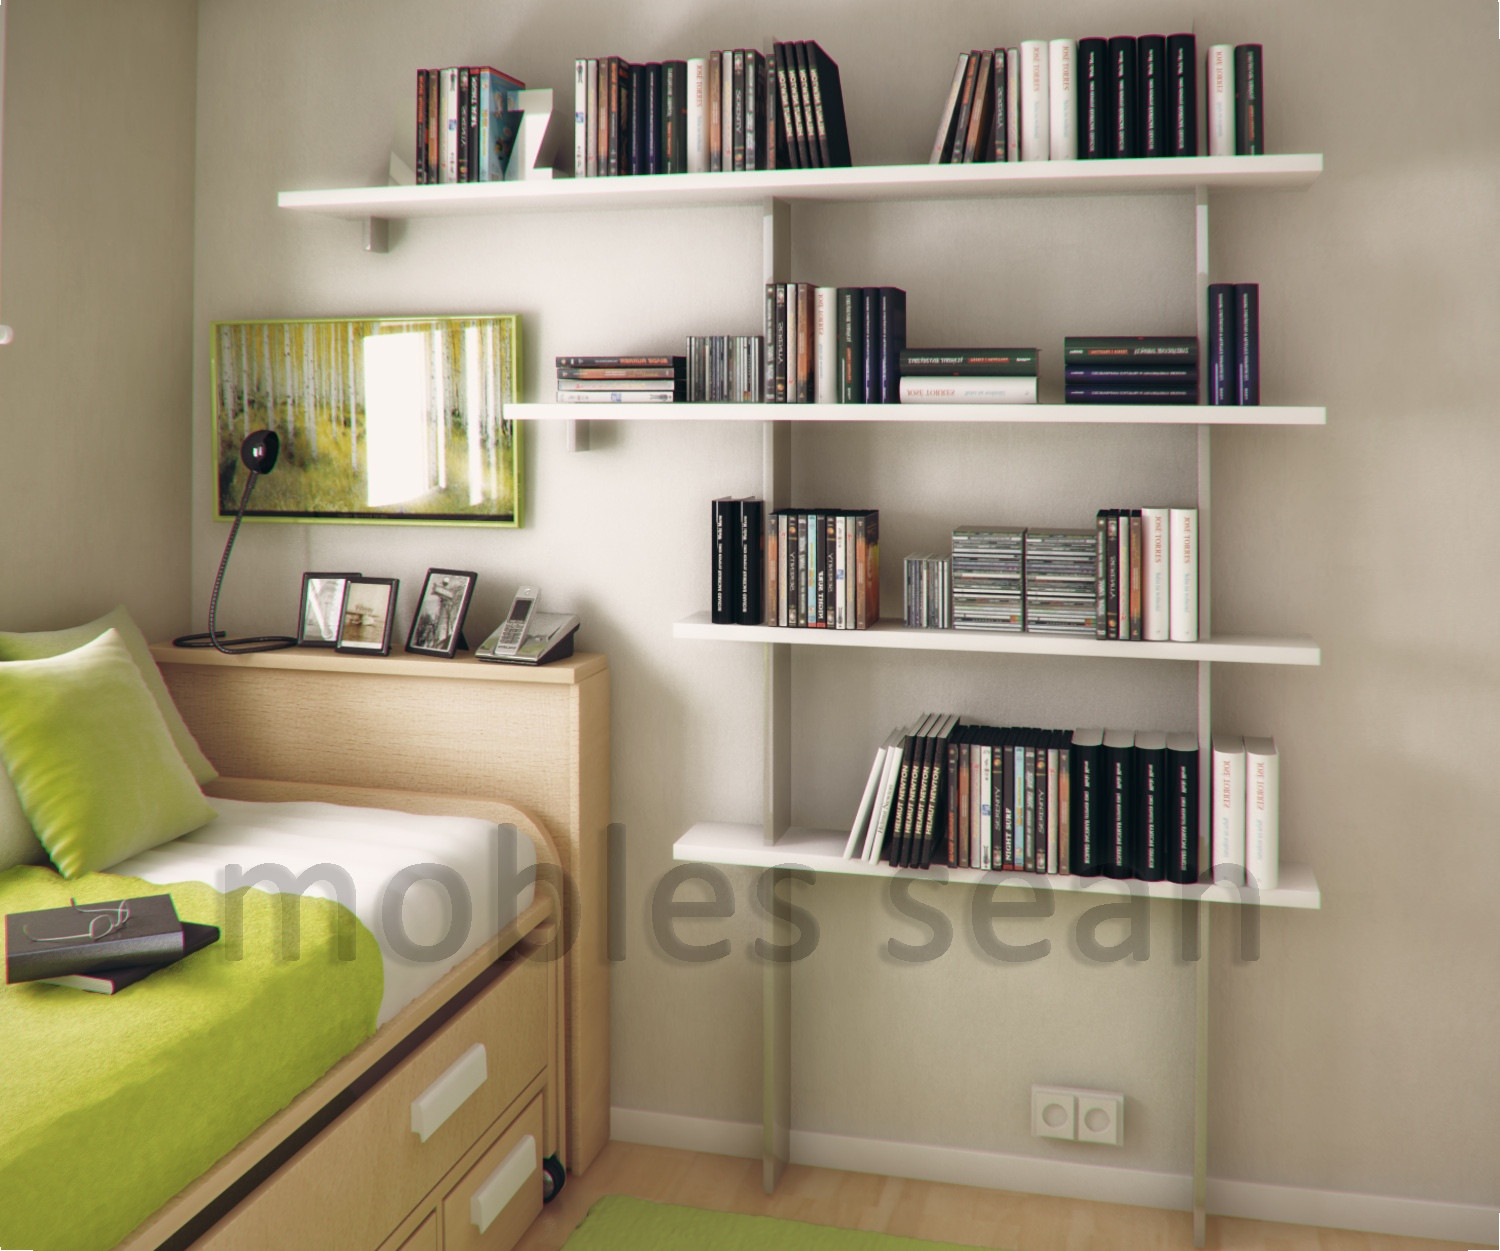 Shelf Ideas For Small Bedroom
 Lime white beech small kids room